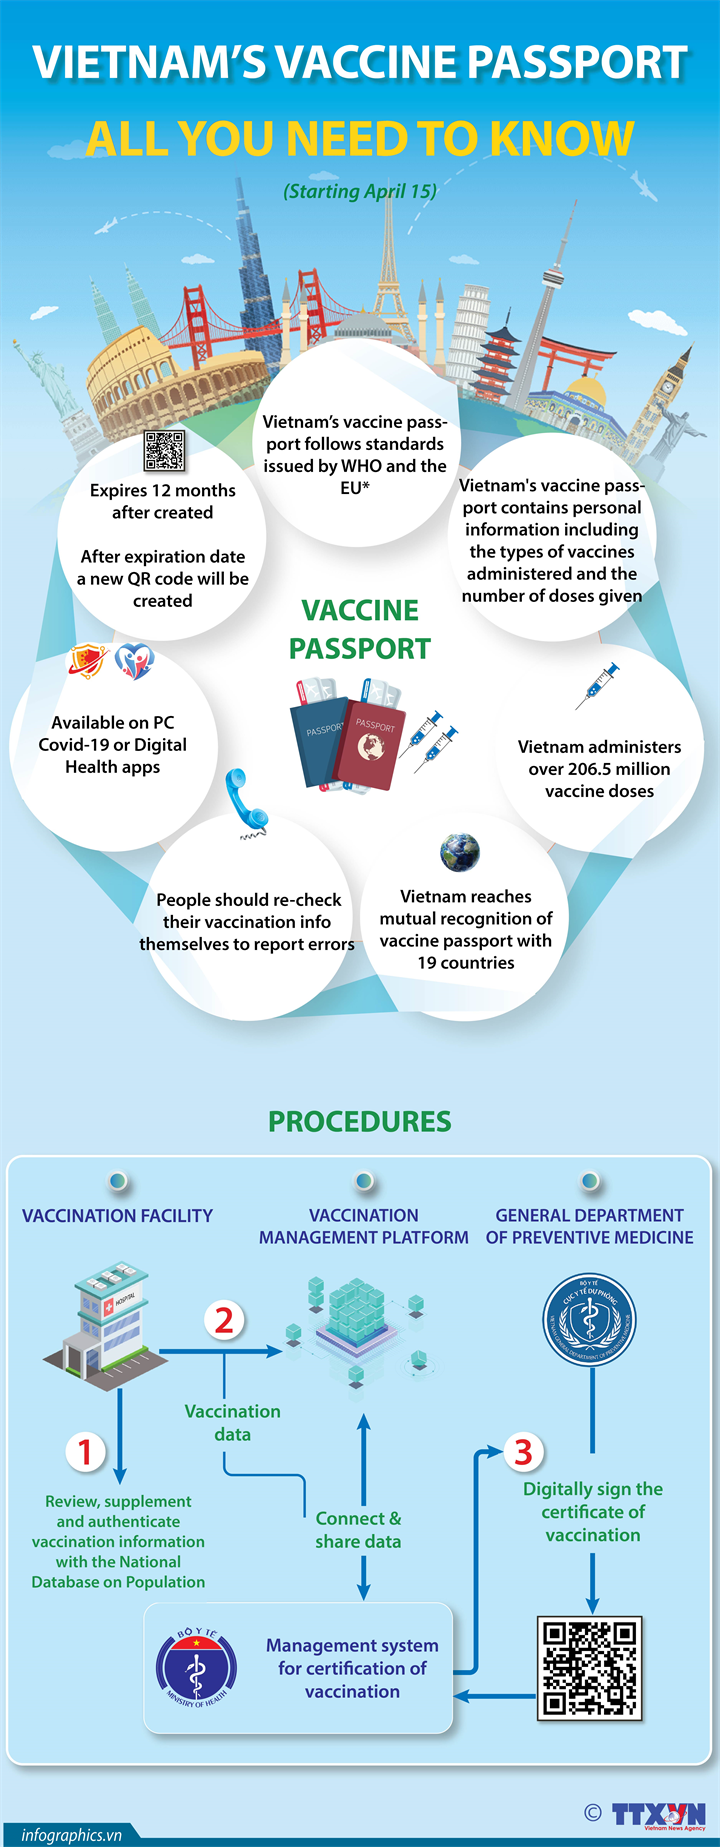 Vietnam's vaccine passport: All you need to know